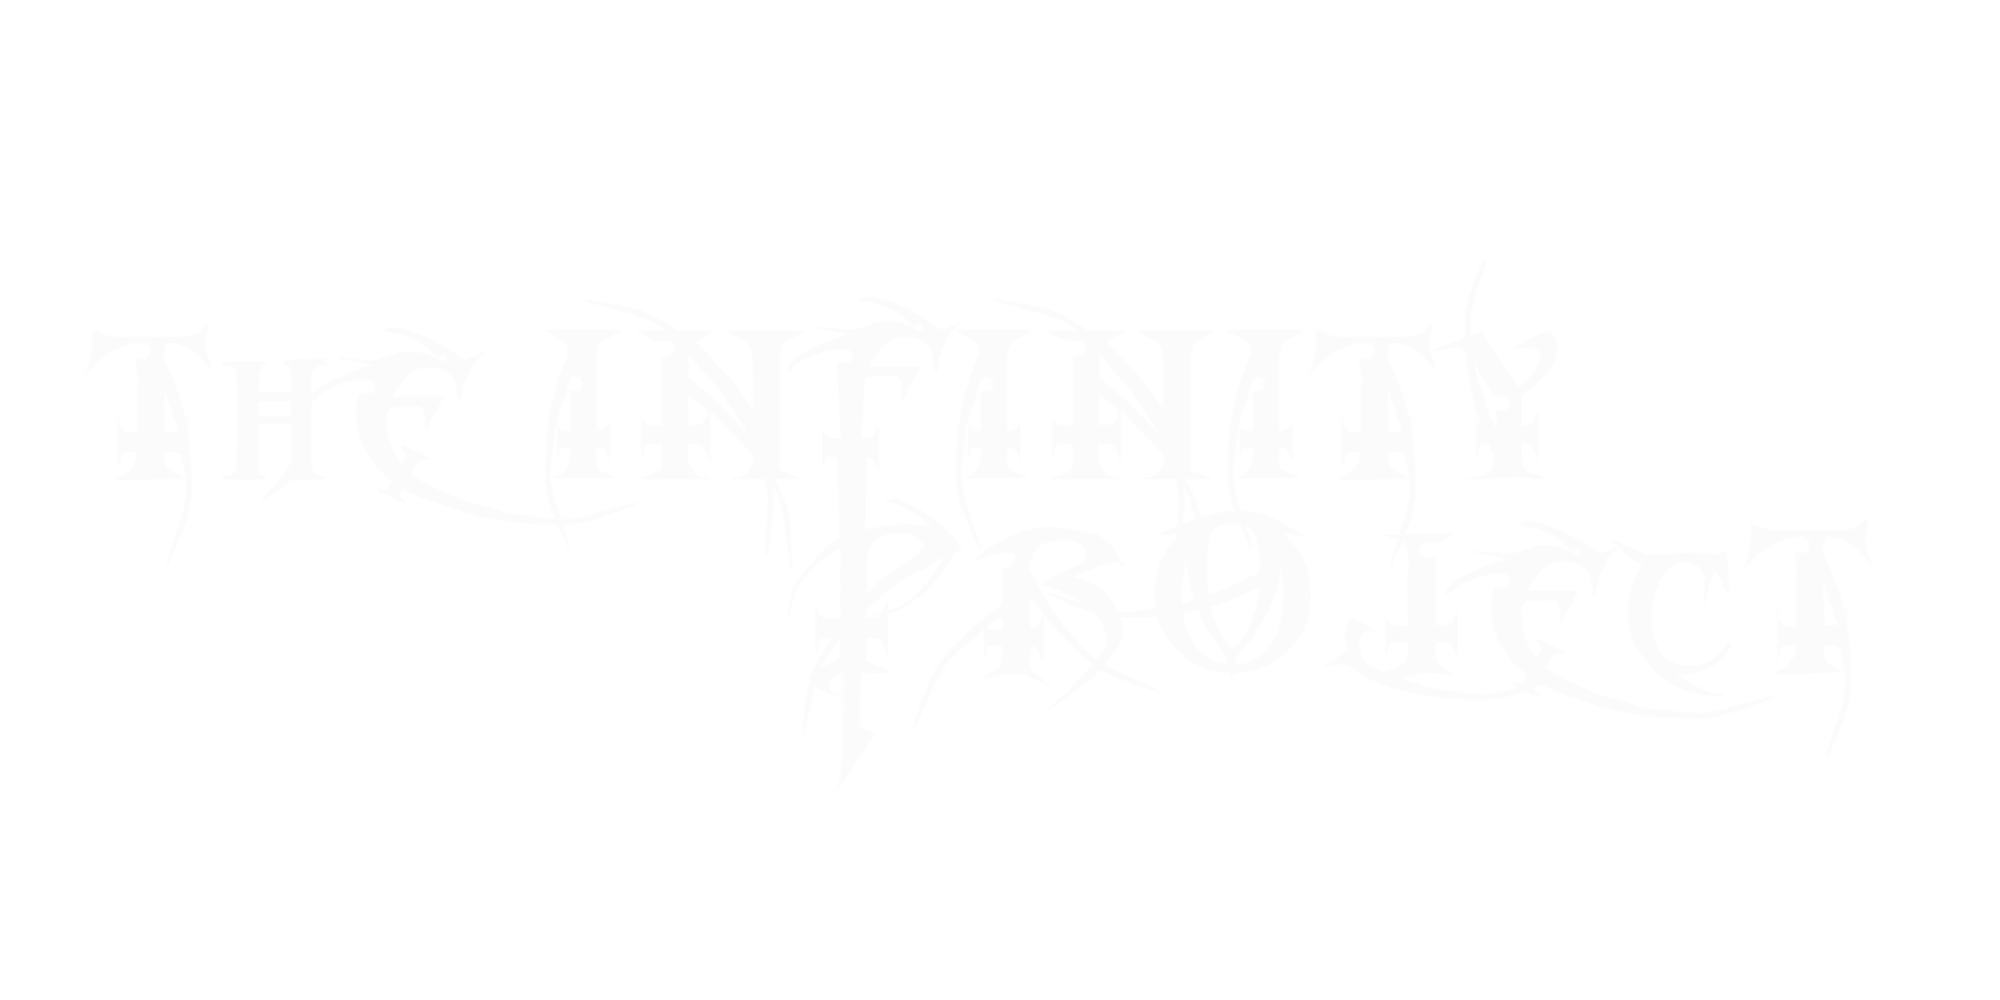 The Infinity Project